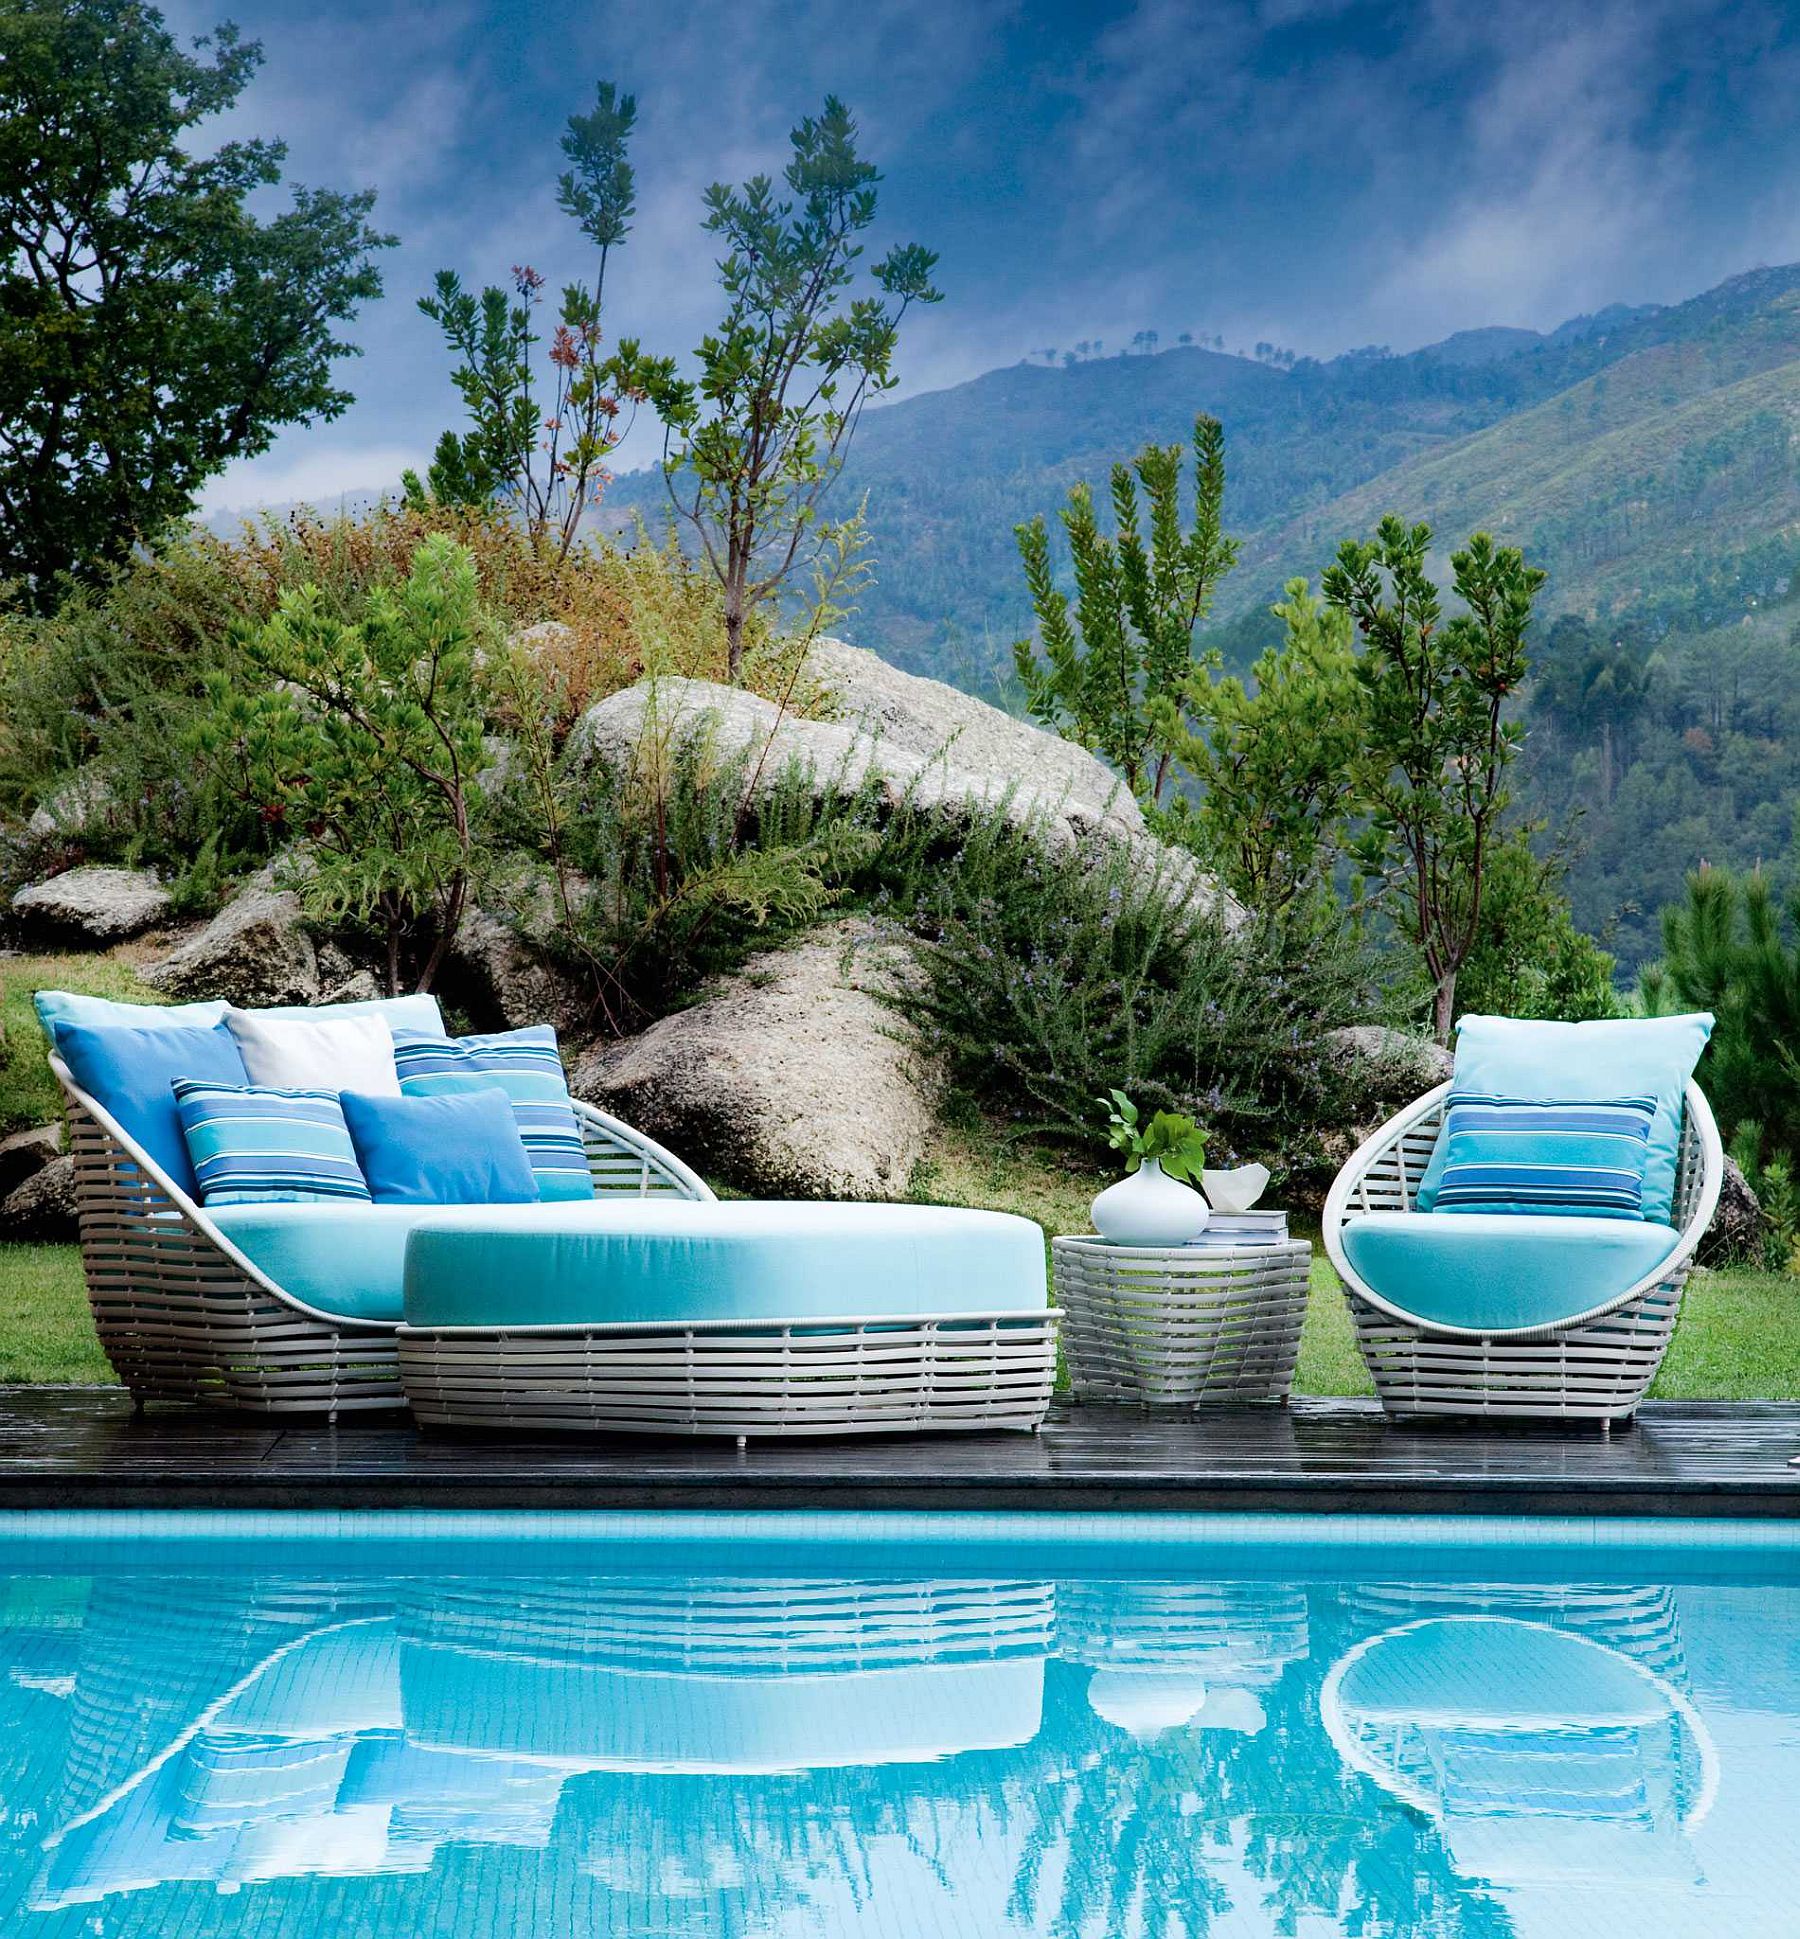 Oasis decor brings modernity to the pool deck